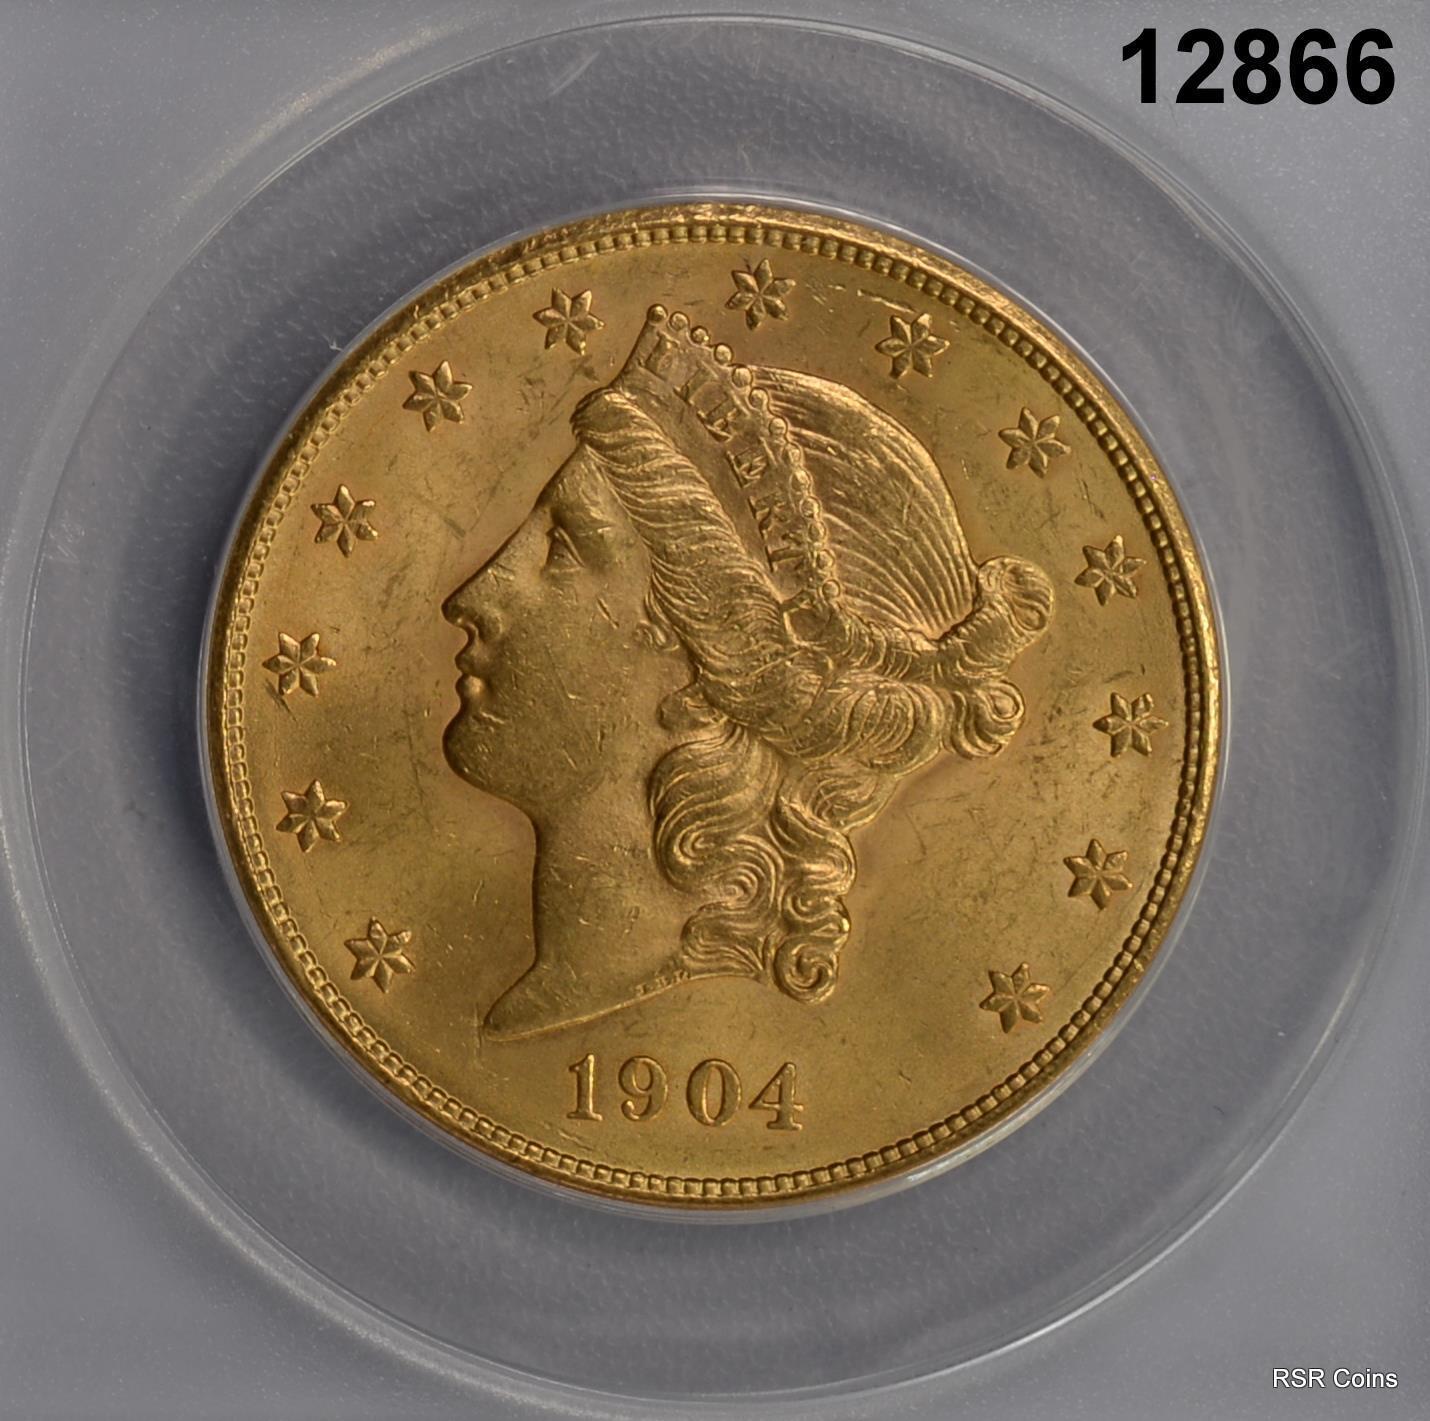 1904 $20 GOLD LIBERTY ANACS CERTIFIED MS62 LOOKS BETTER! #12866